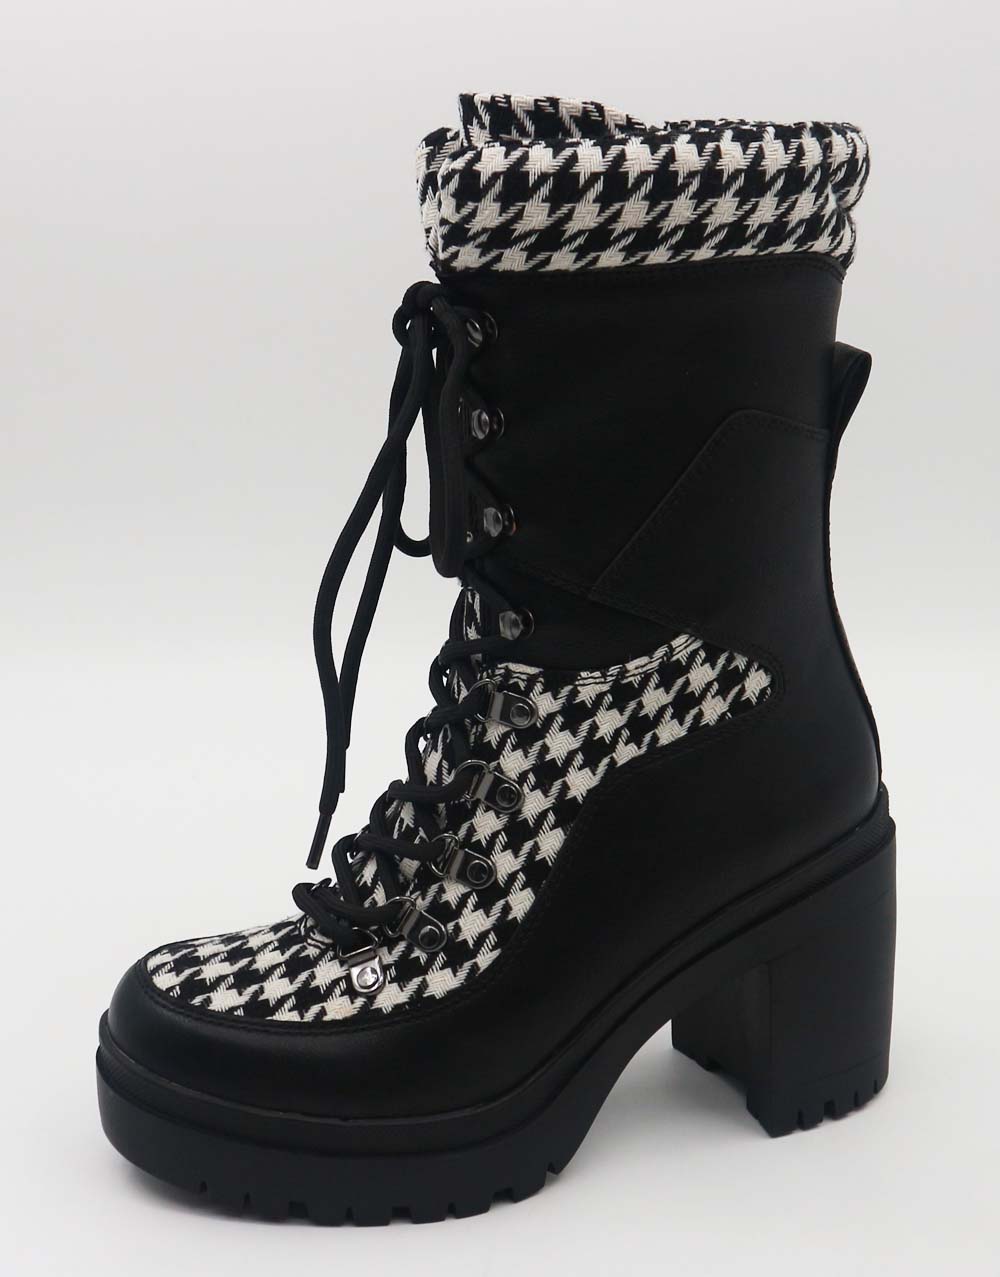 Houndstooth Boots